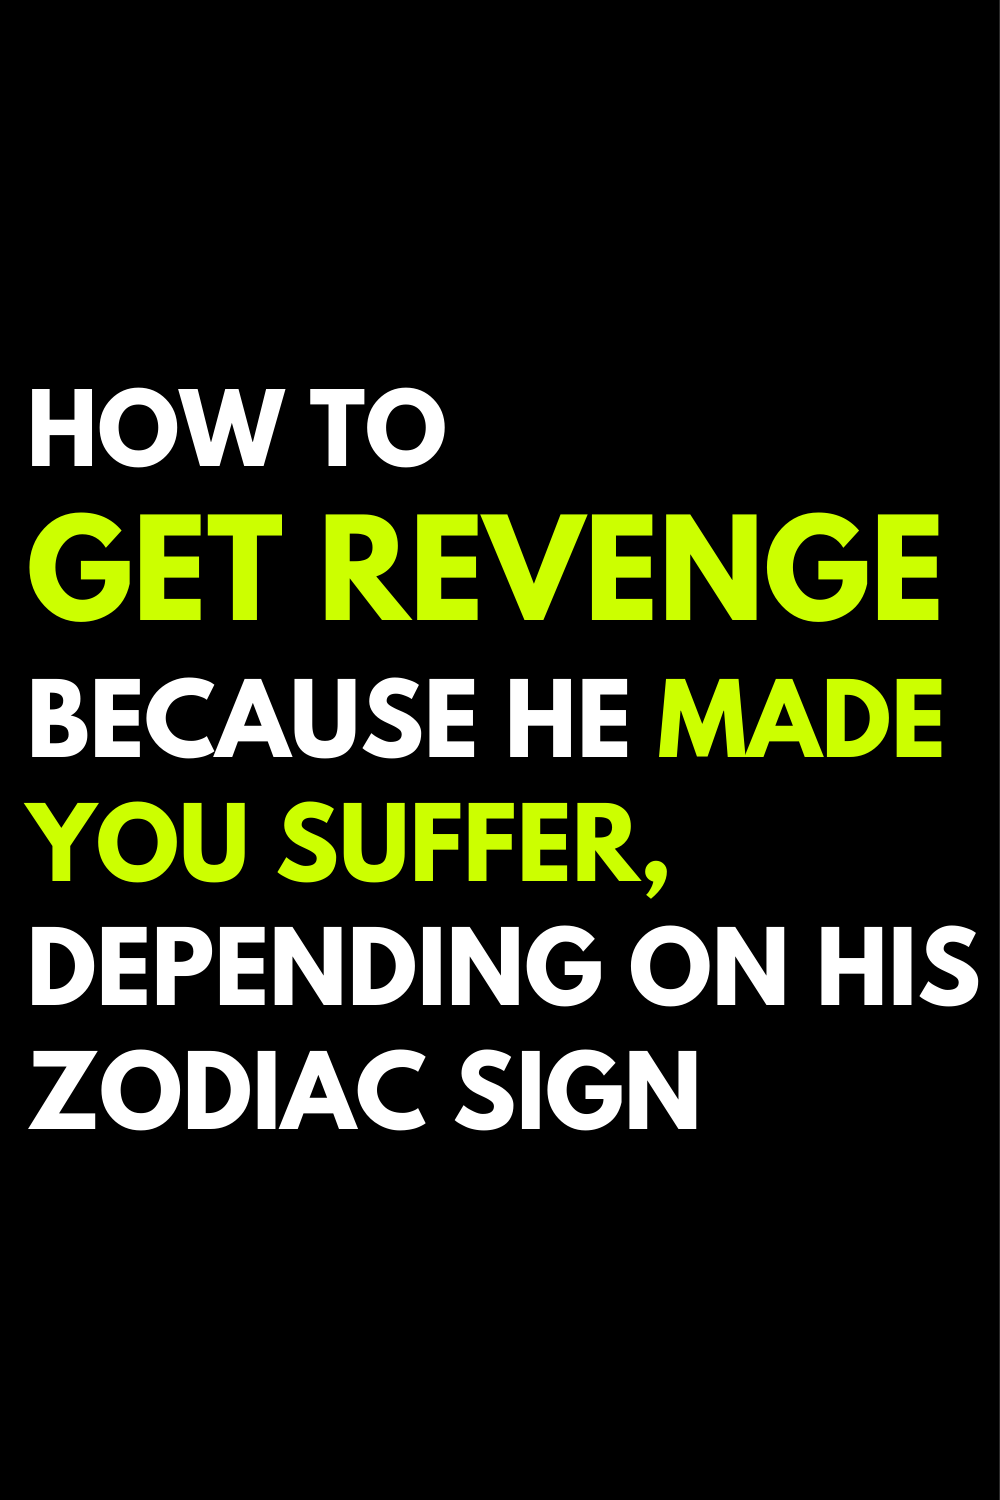 How to get revenge because he made you suffer, depending on his zodiac sign